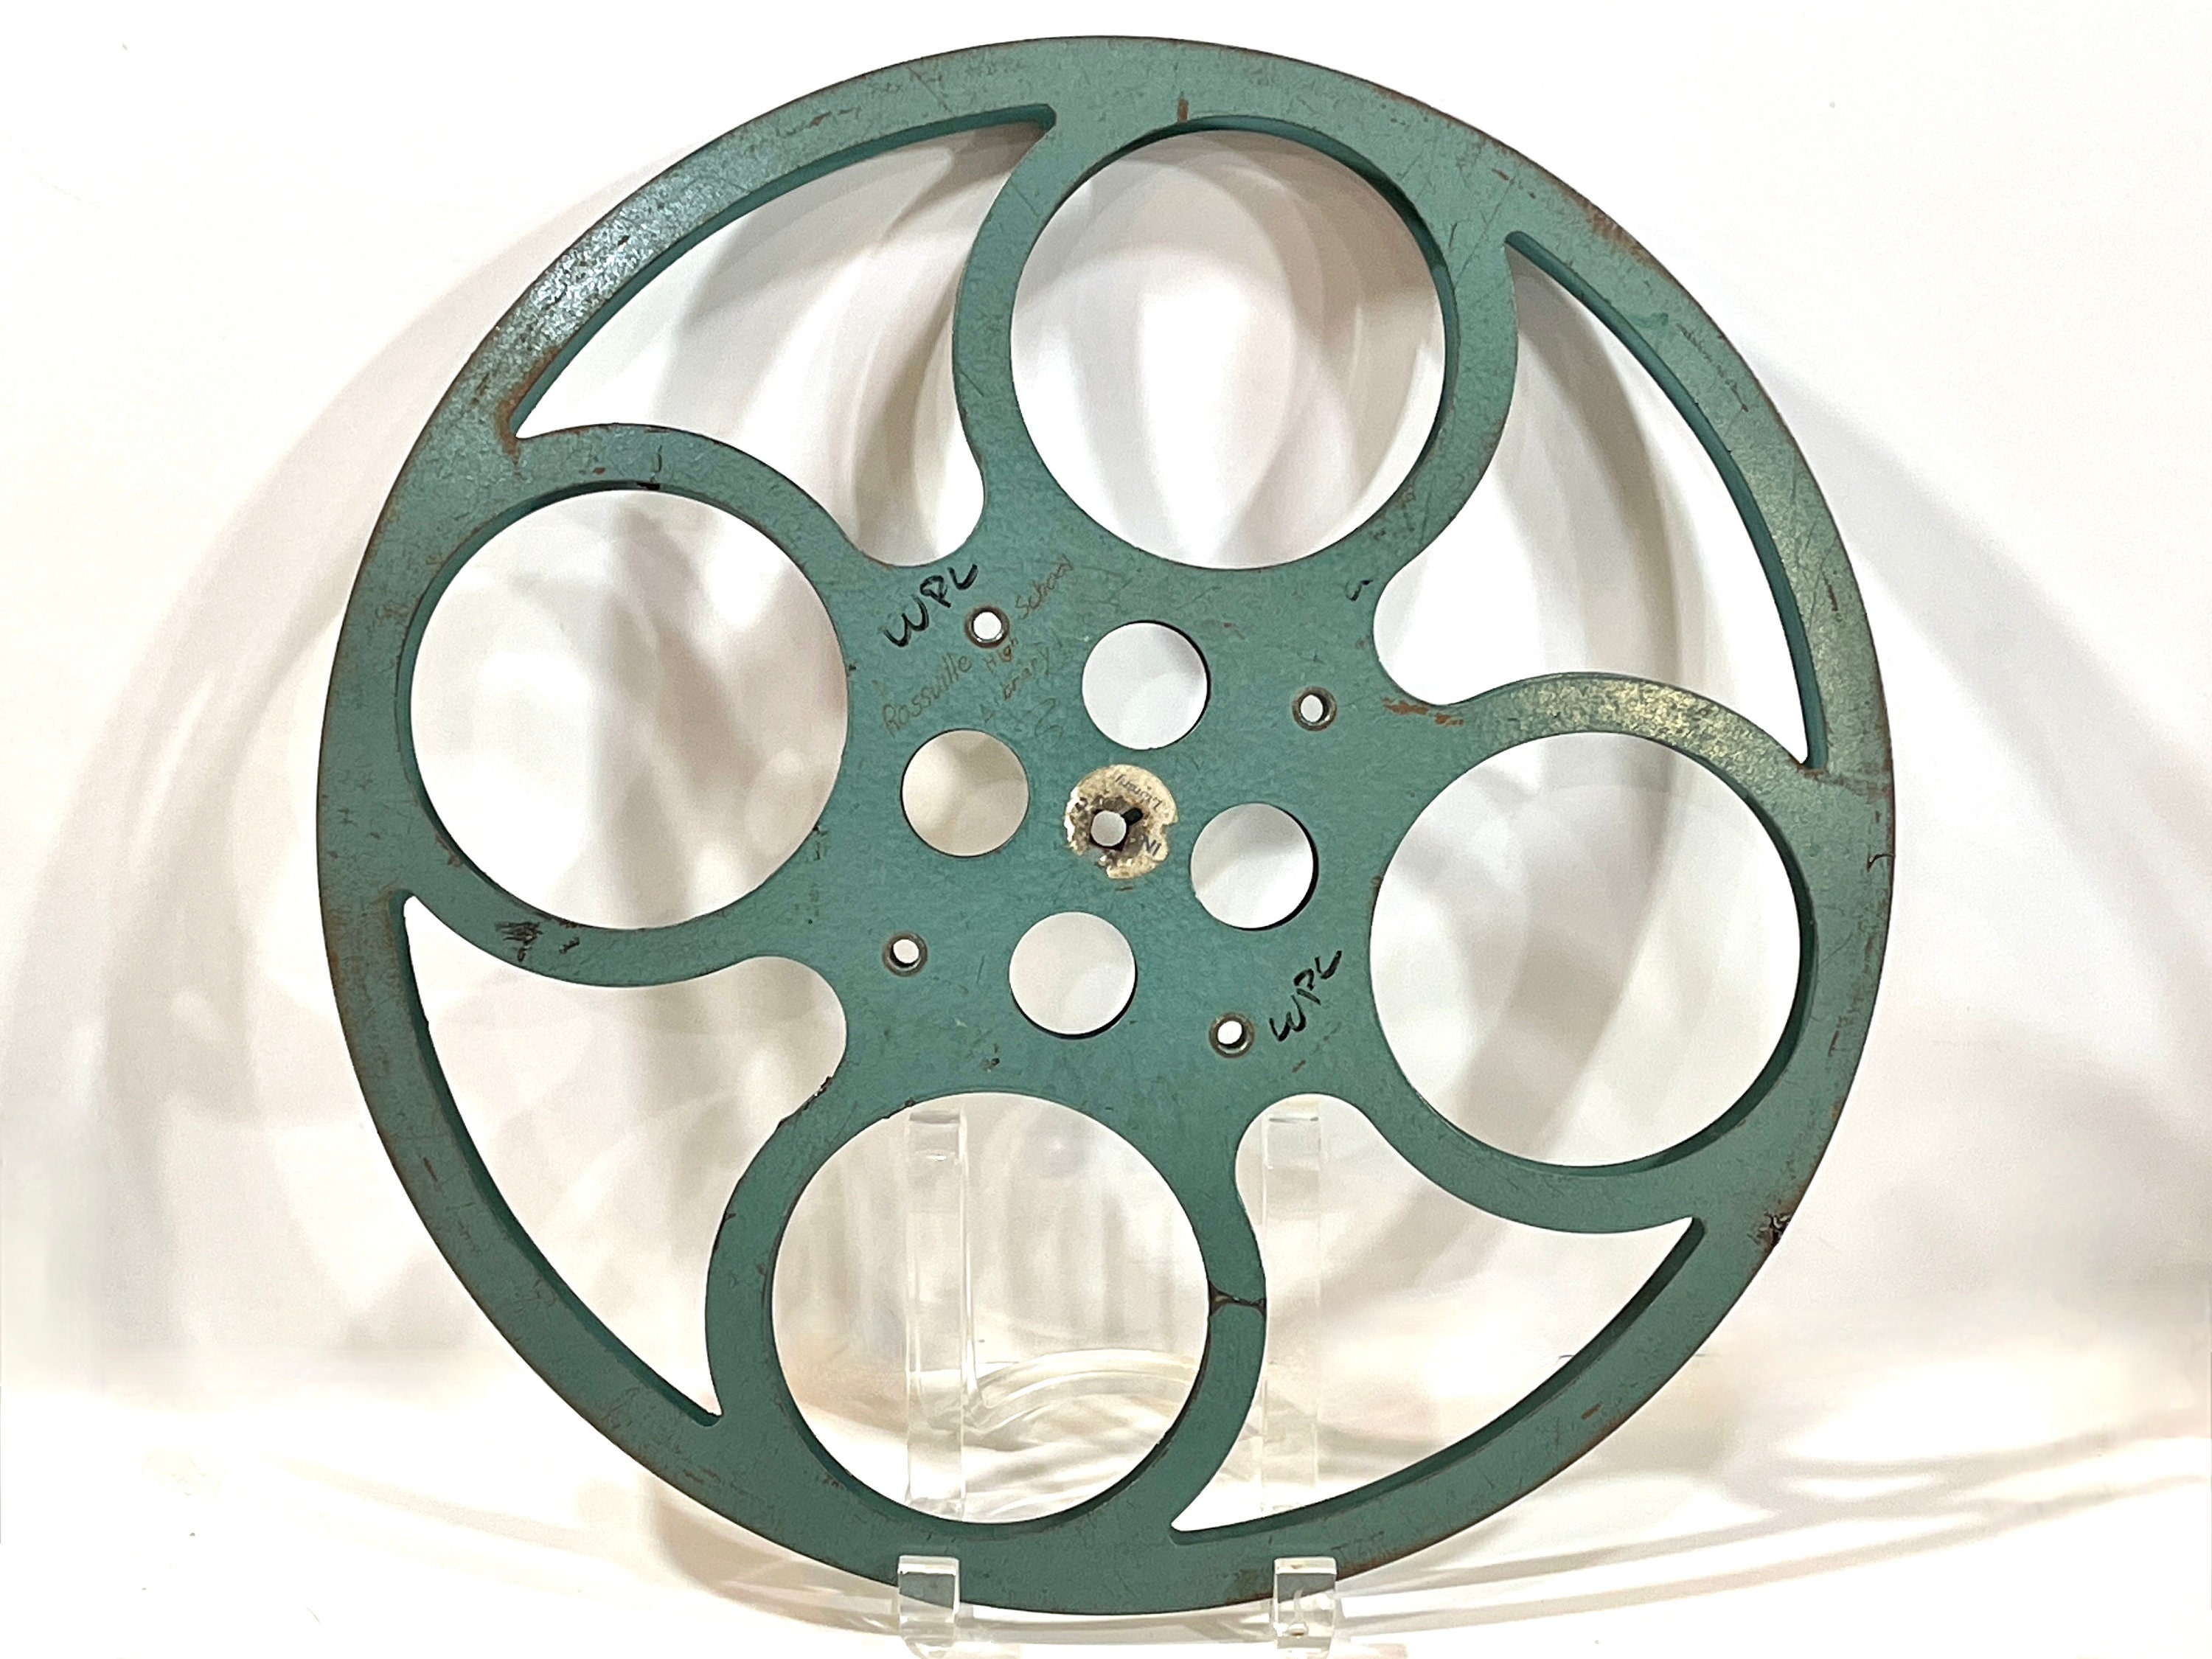 Vintage Film Reel, Green Metal, 14 inch, Home Theater Decor, Actor,  Director, Filmmaker, Screenwriter, Vintage Collectible, Altered Art